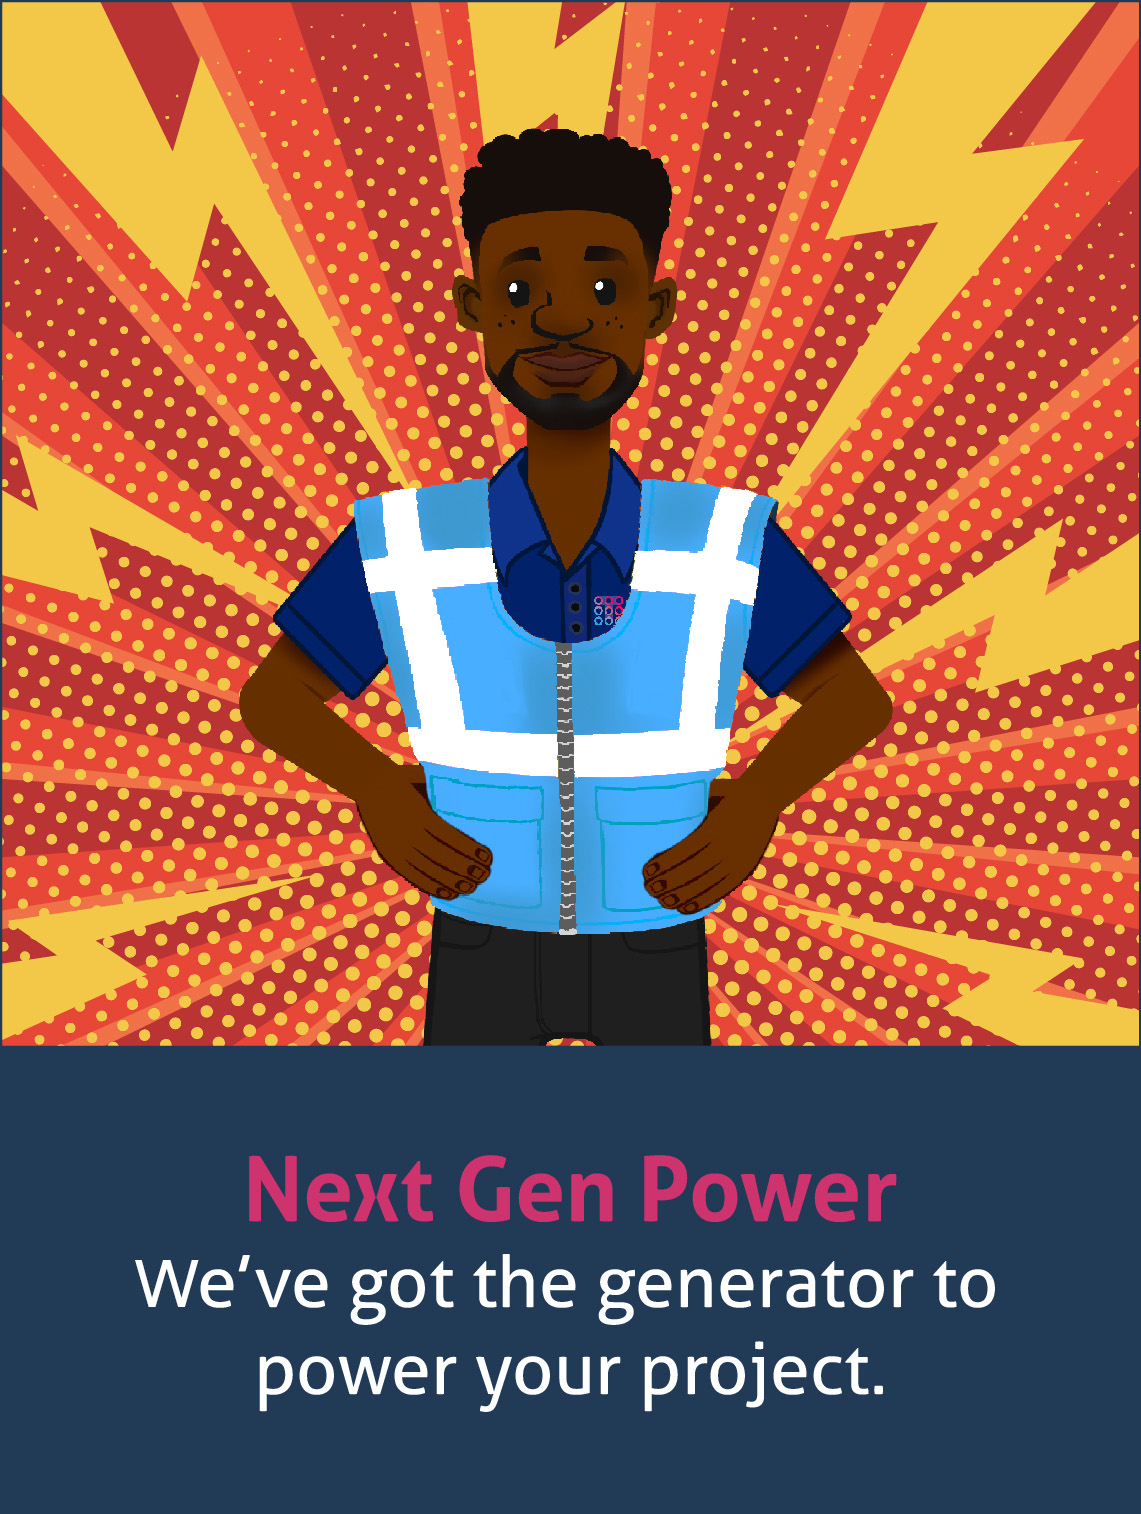 Next gen power - we've got the generator to power your project